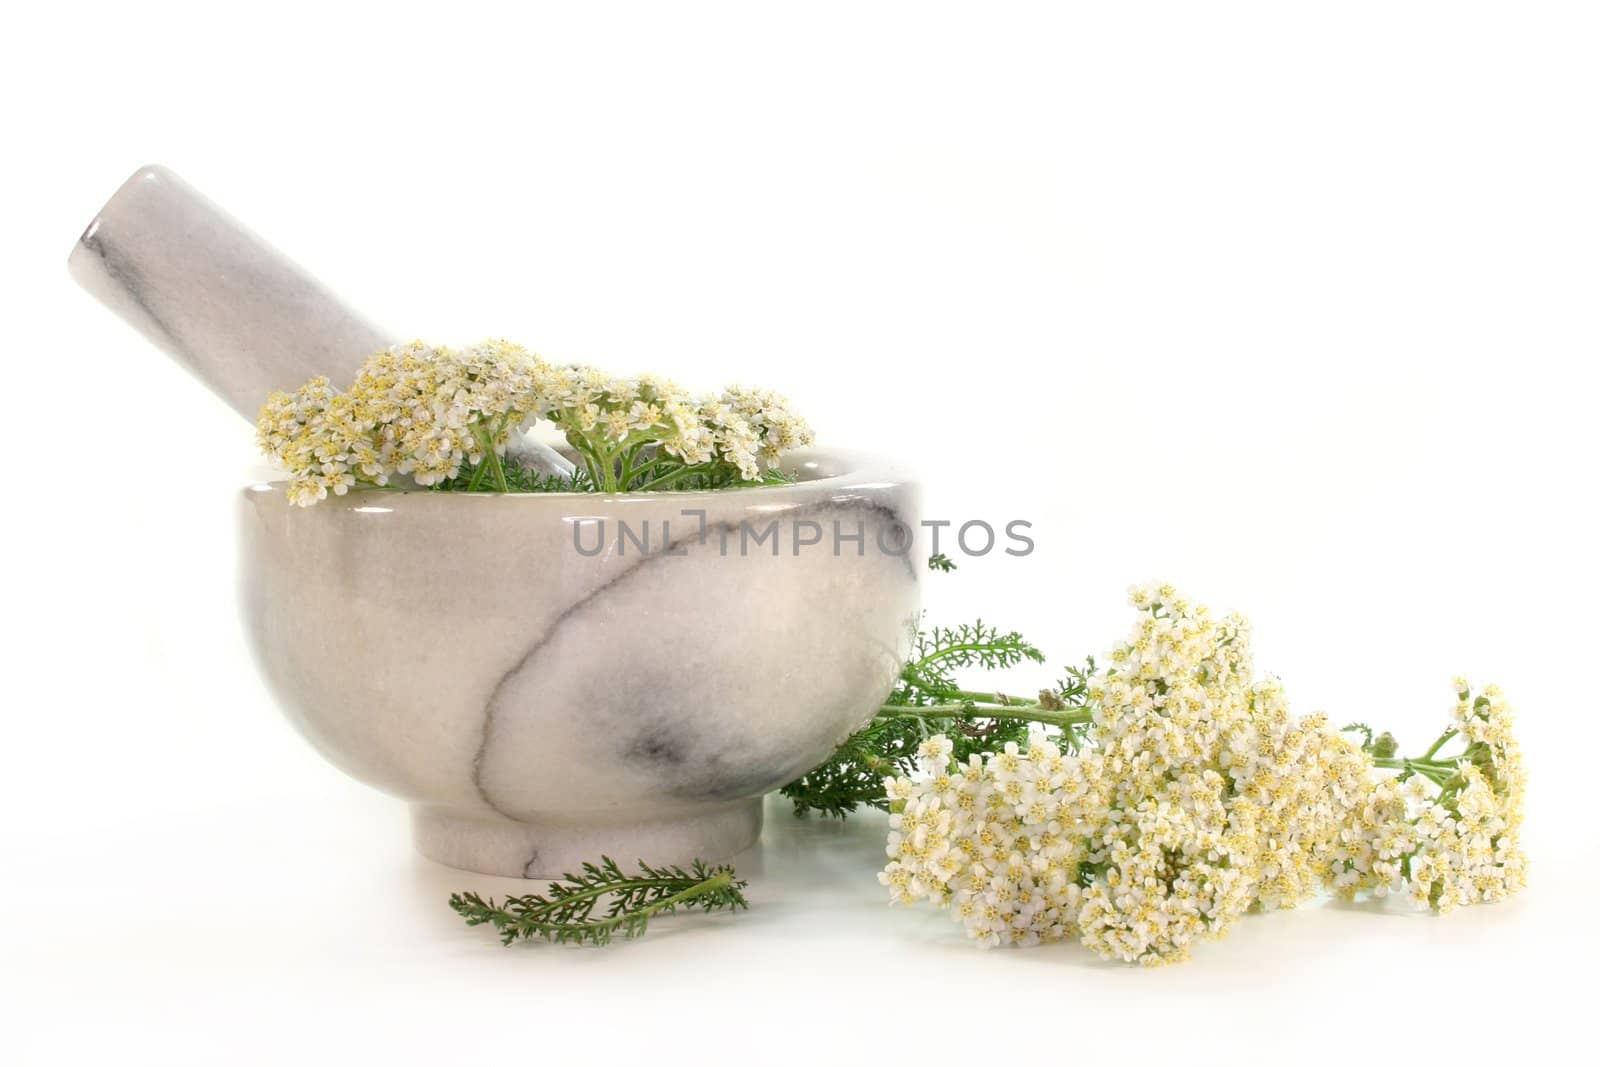 branches fresh yarrow in a mortar on white background
